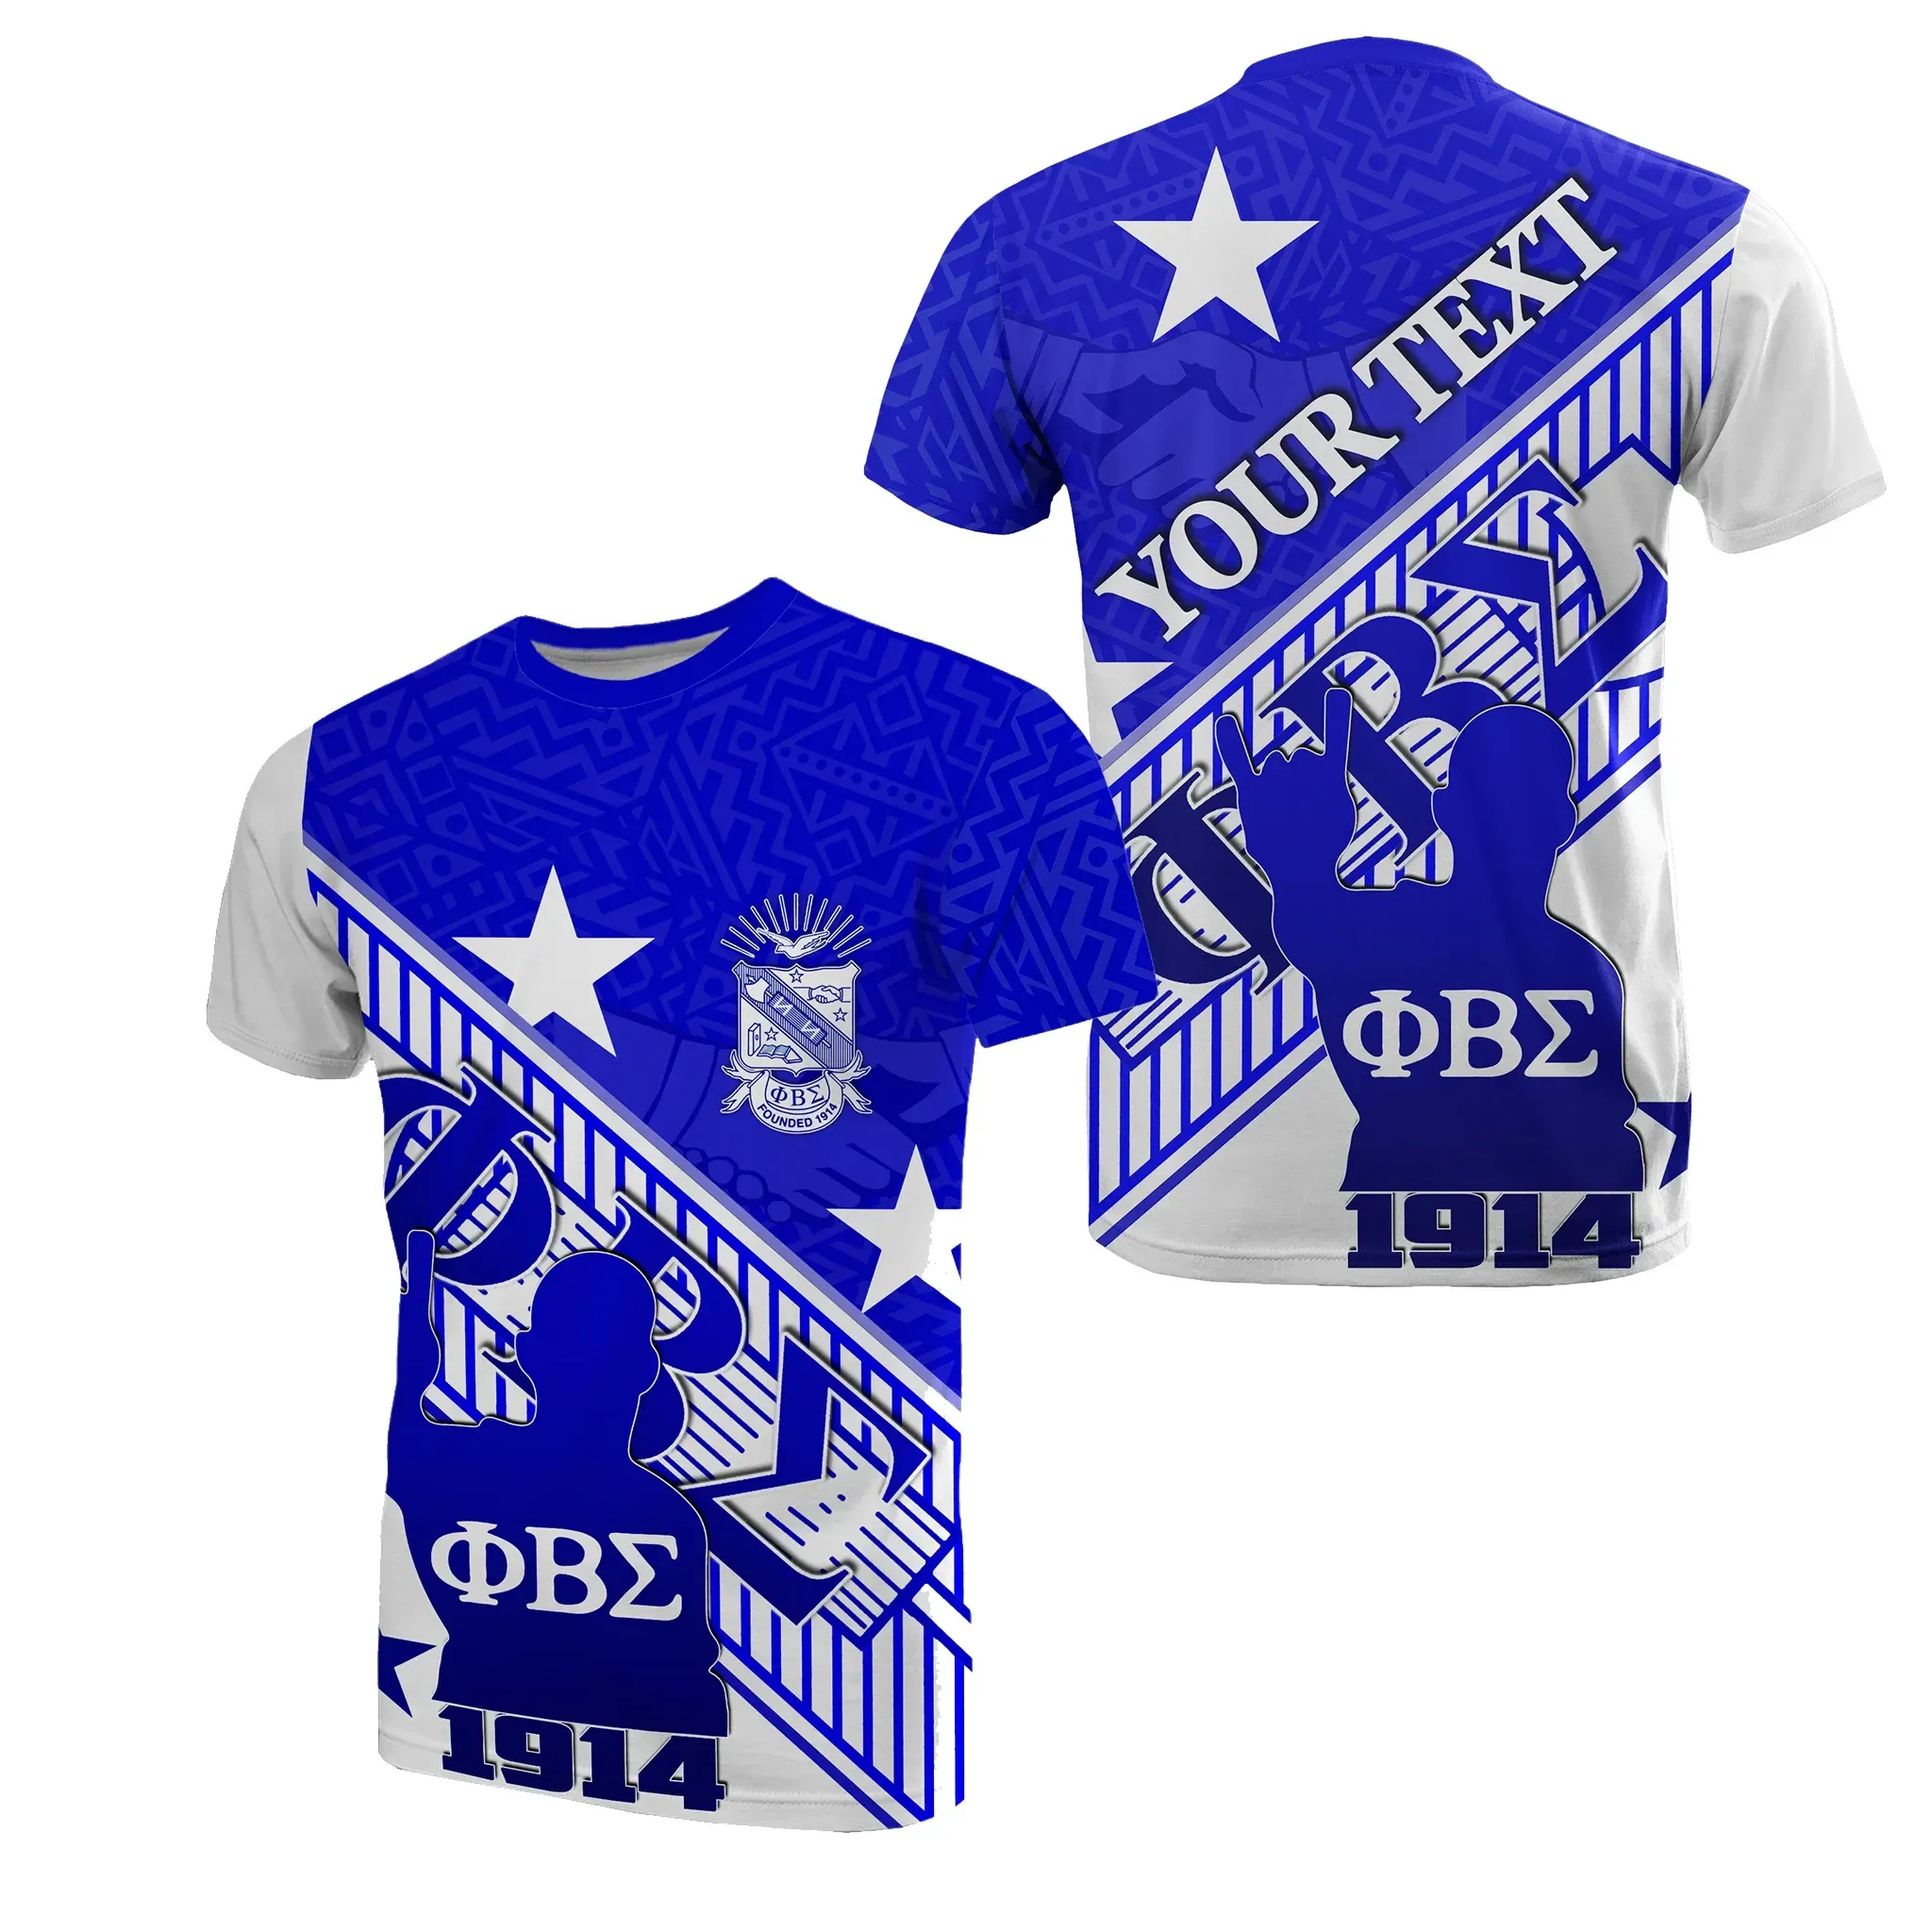 T-shirt – Personalized Phi Beta Sigma Crest Style Tee